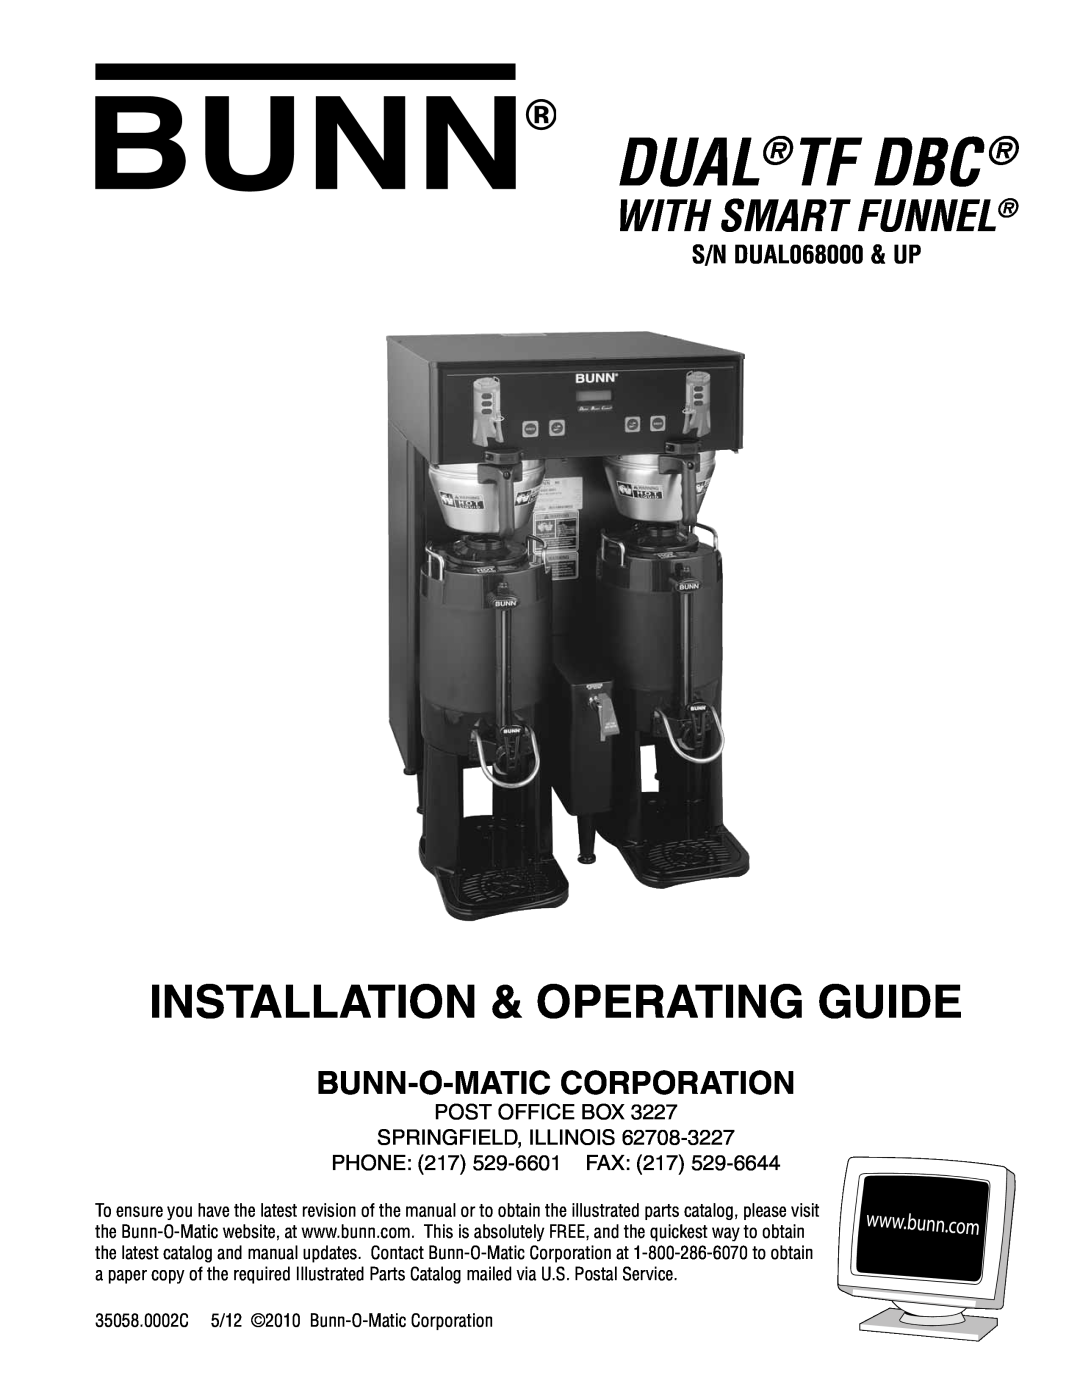 Bunn manual S/N DUAL068000 & UP, Dual Sh Dbc, Installation & Operating Guide, With Smart Funnel 